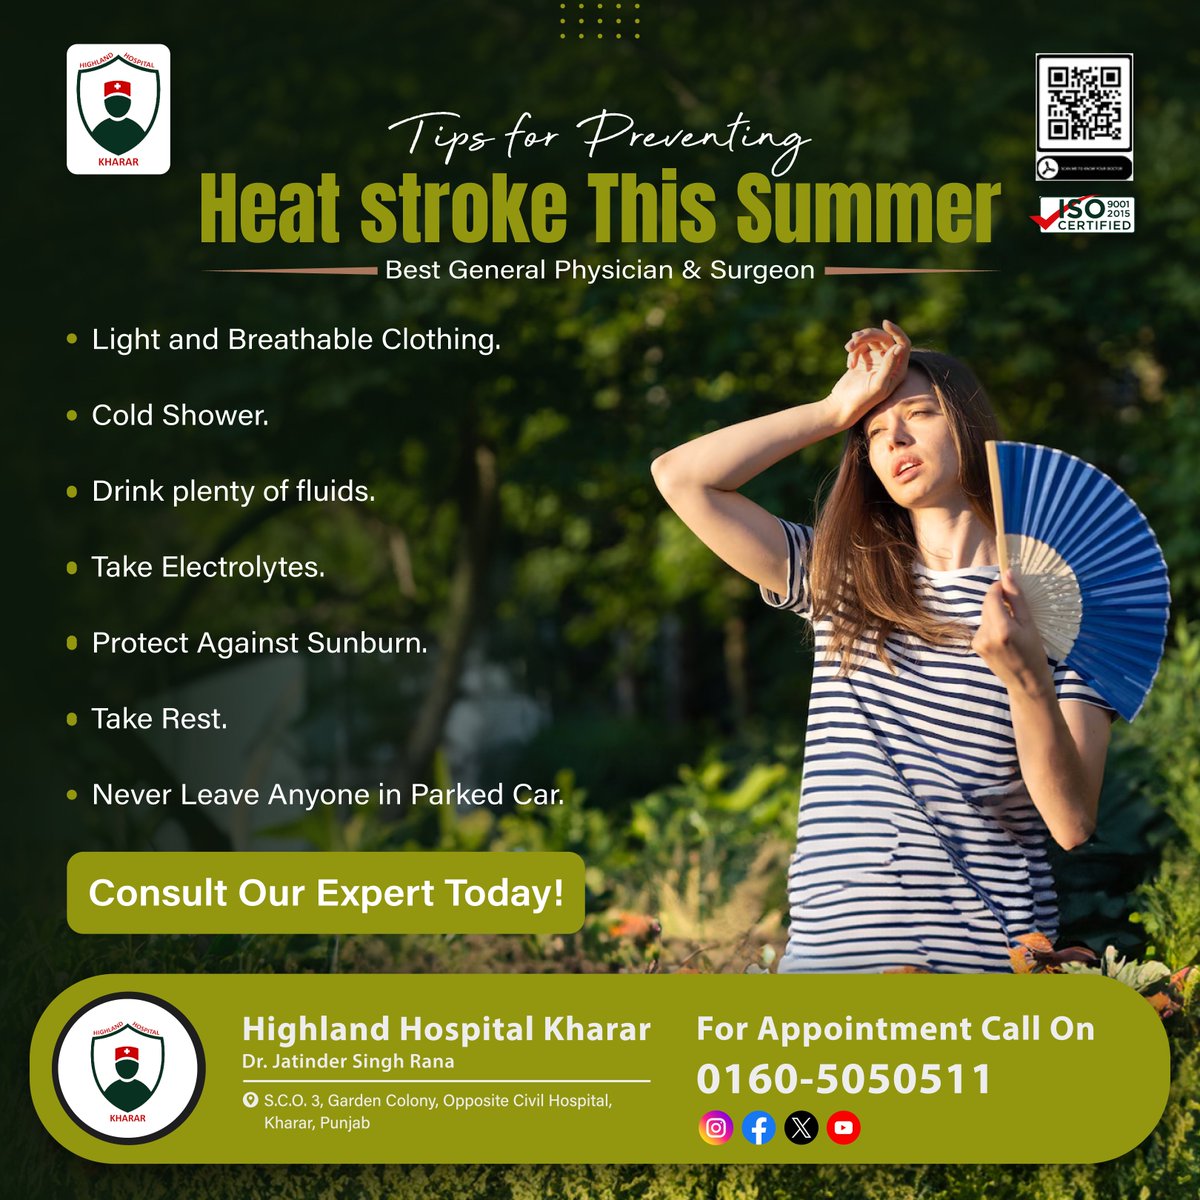 Summer is here, and so is the #risk of heat stroke! Follow us for our top #tips to prevent #heatstroke and enjoy a safe #summer!
.
#Health #FactCheck #DonateBlood #Kharar #Mohali #DrJatinderSingh #Besthospital #heatstroke #stroke #summers #StayCool #Hydrate #SunSafety #HealthTips